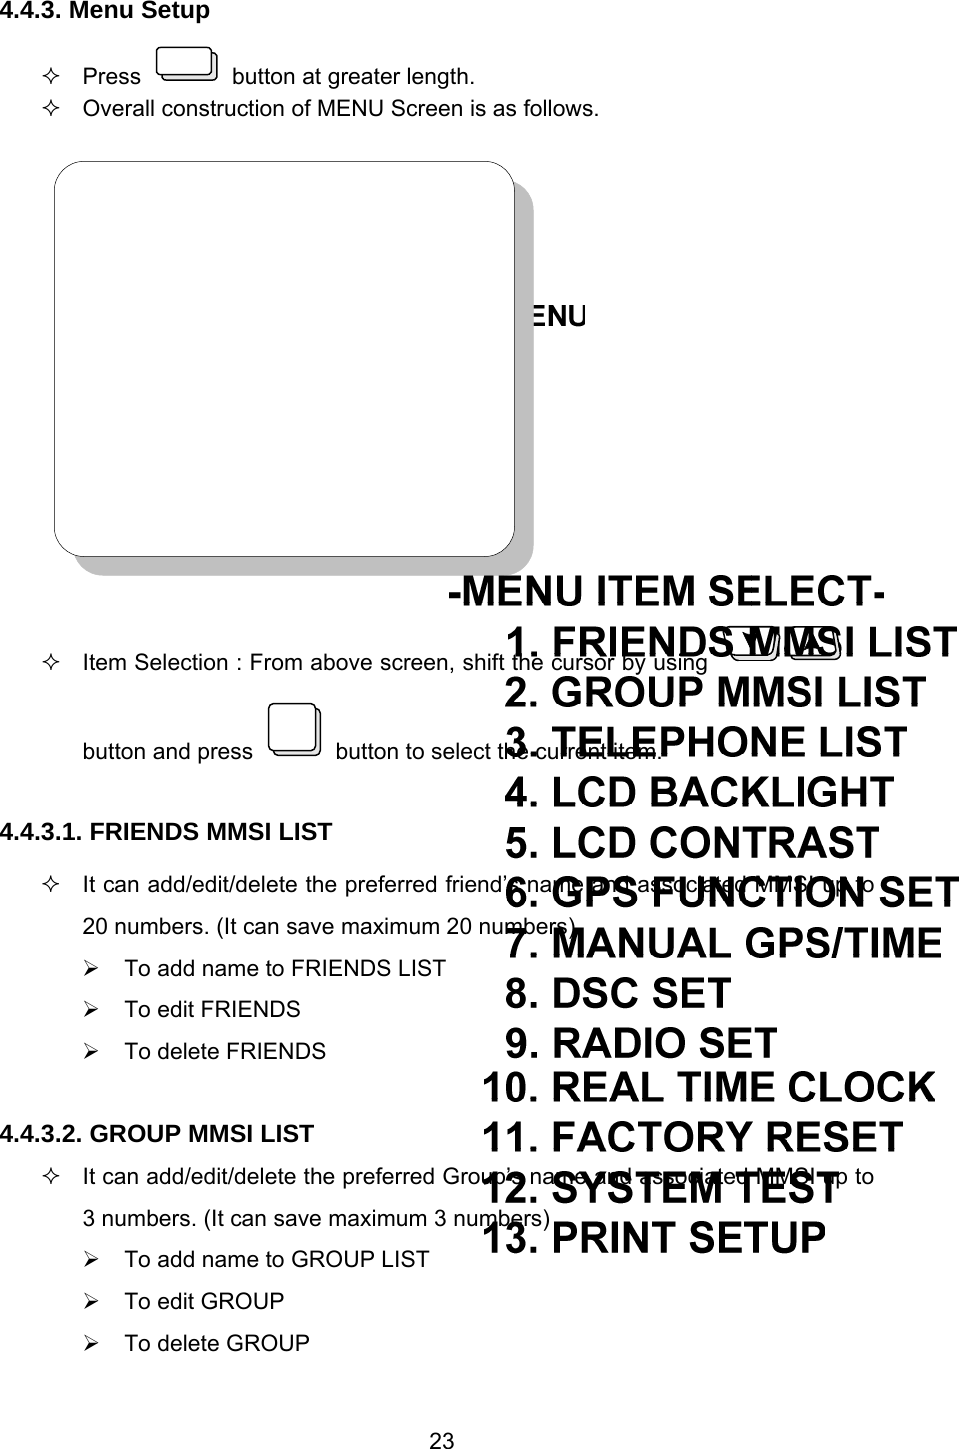 23 4.4.3. Menu Setup  Press    button at greater length.   Overall construction of MENU Screen is as follows.     Item Selection : From above screen, shift the cursor by using   button and press    button to select the current item.  4.4.3.1. FRIENDS MMSI LIST   It can add/edit/delete the preferred friend’s name and associated MMSI up to 20 numbers. (It can save maximum 20 numbers) ¾  To add name to FRIENDS LIST ¾  To edit FRIENDS ¾  To delete FRIENDS  4.4.3.2. GROUP MMSI LIST   It can add/edit/delete the preferred Group’s name and associated MMSI up to 3 numbers. (It can save maximum 3 numbers) ¾  To add name to GROUP LIST ¾  To edit GROUP ¾  To delete GROUP 